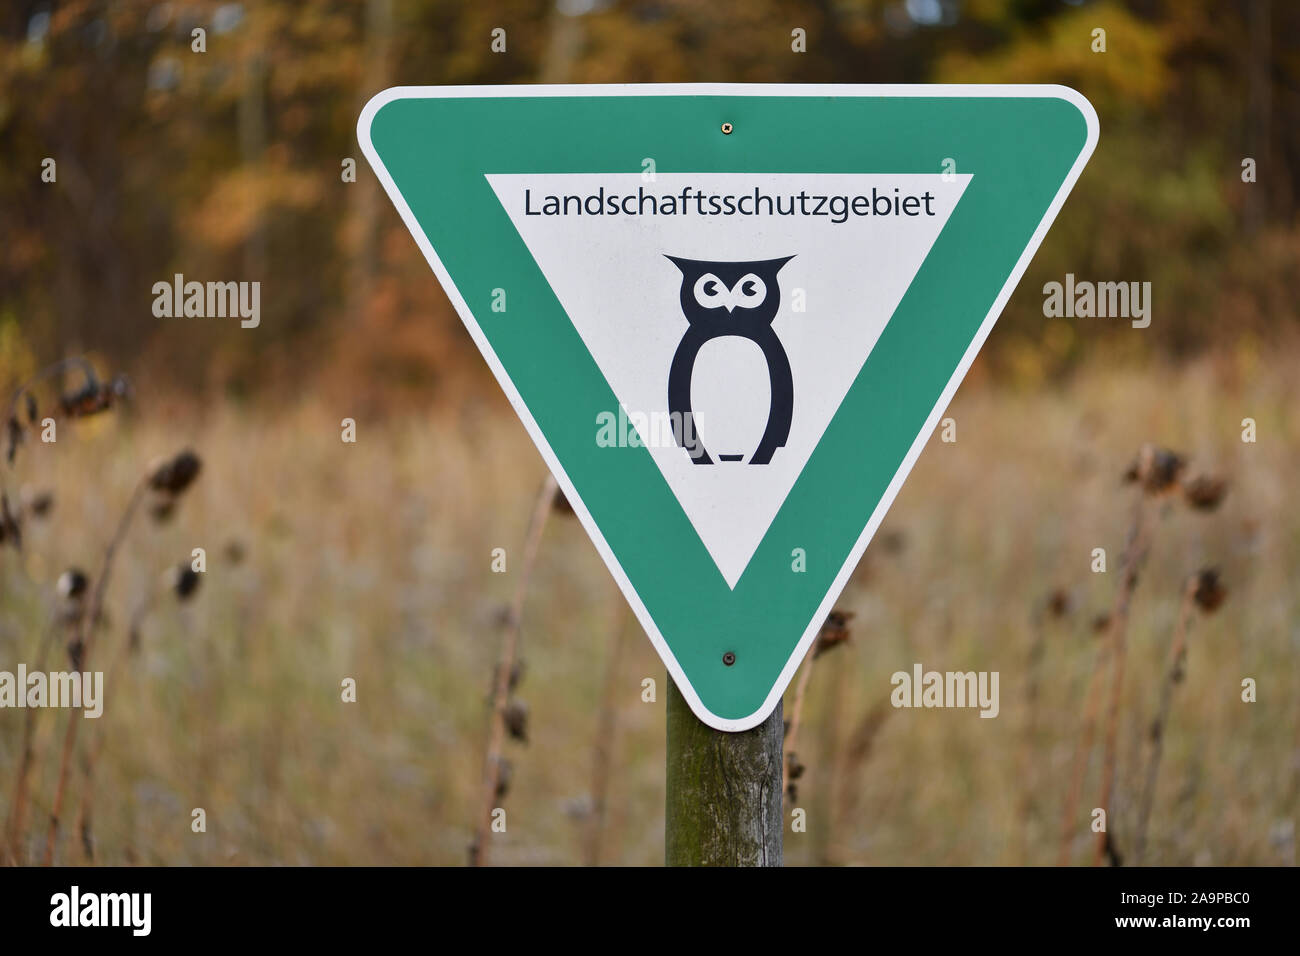 Nature preserve area in Lower Saxony, Germany. Green sign with black owl indicating a landscape reserve. Symbol for German landscape protection area. Stock Photo